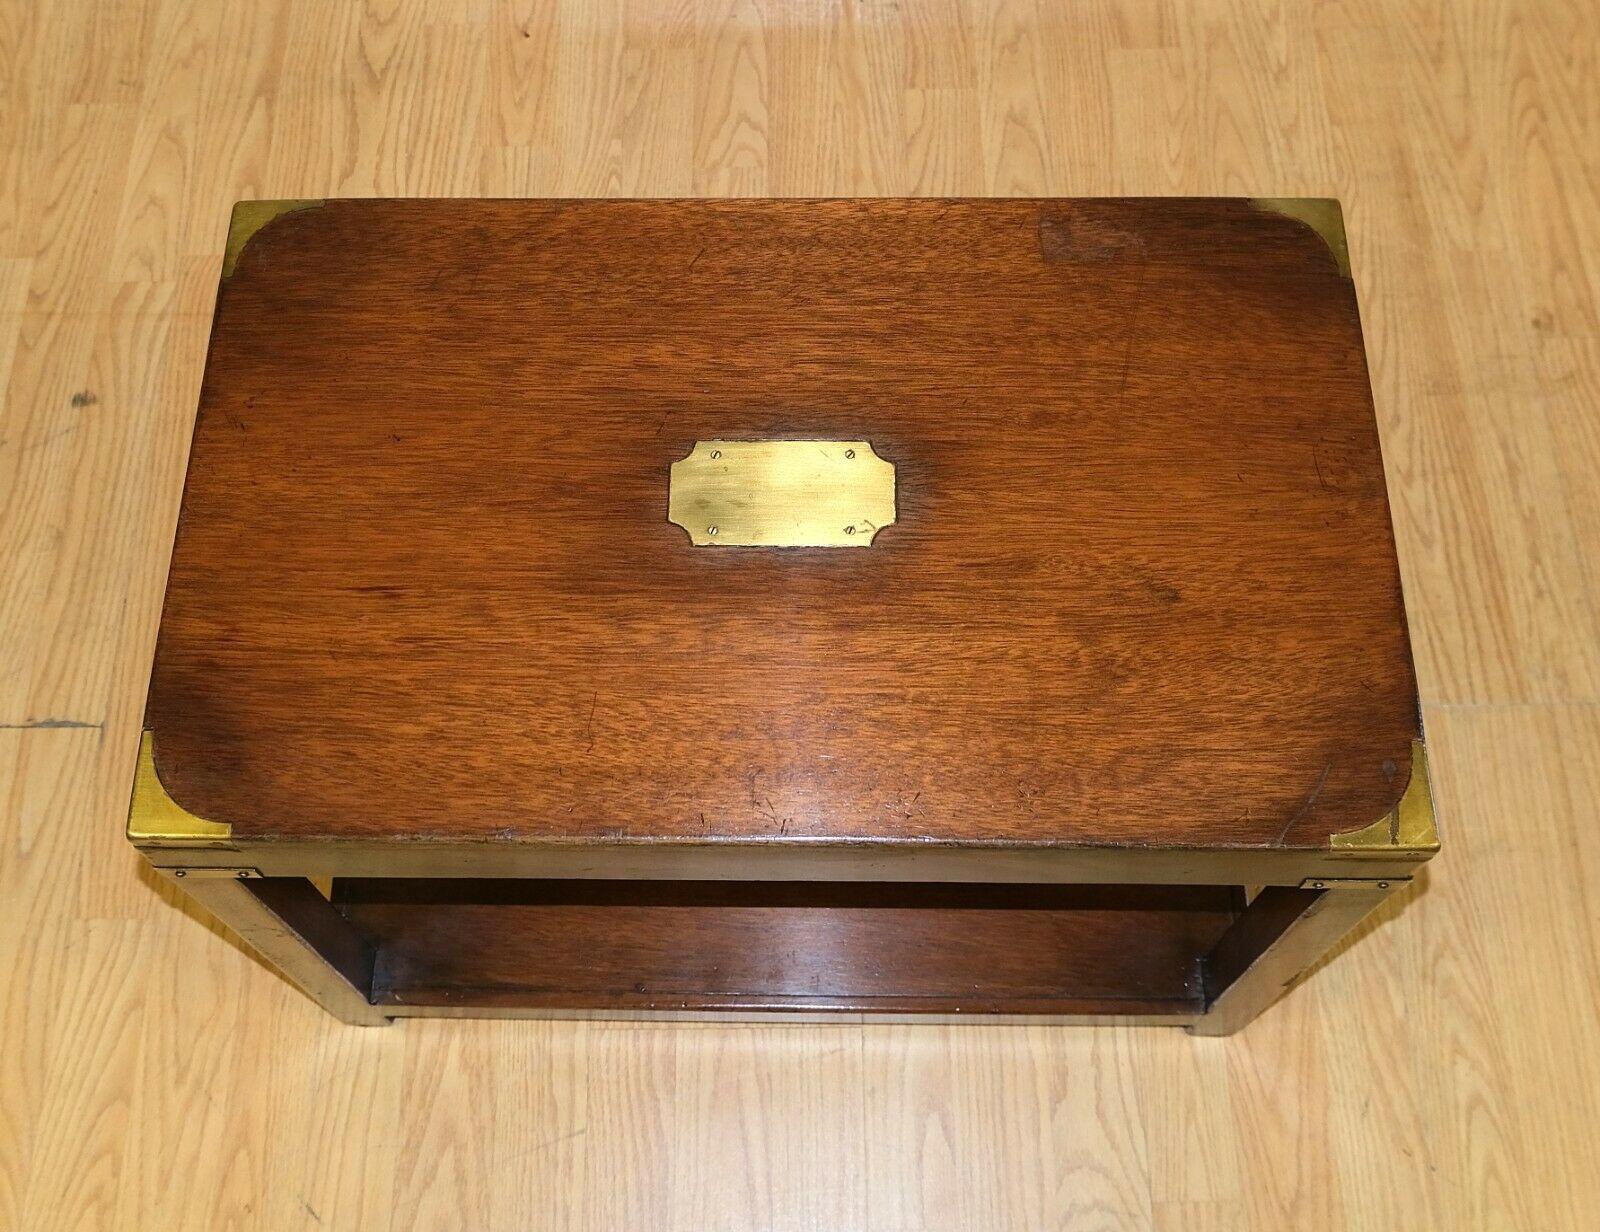 We are delighted to offer for sale this charming Kennedy Mahogany side table with brass details.

This is a very well made and versatile item as it can be used as an occasional or side table. The table is stable, but as you can see in the pictures